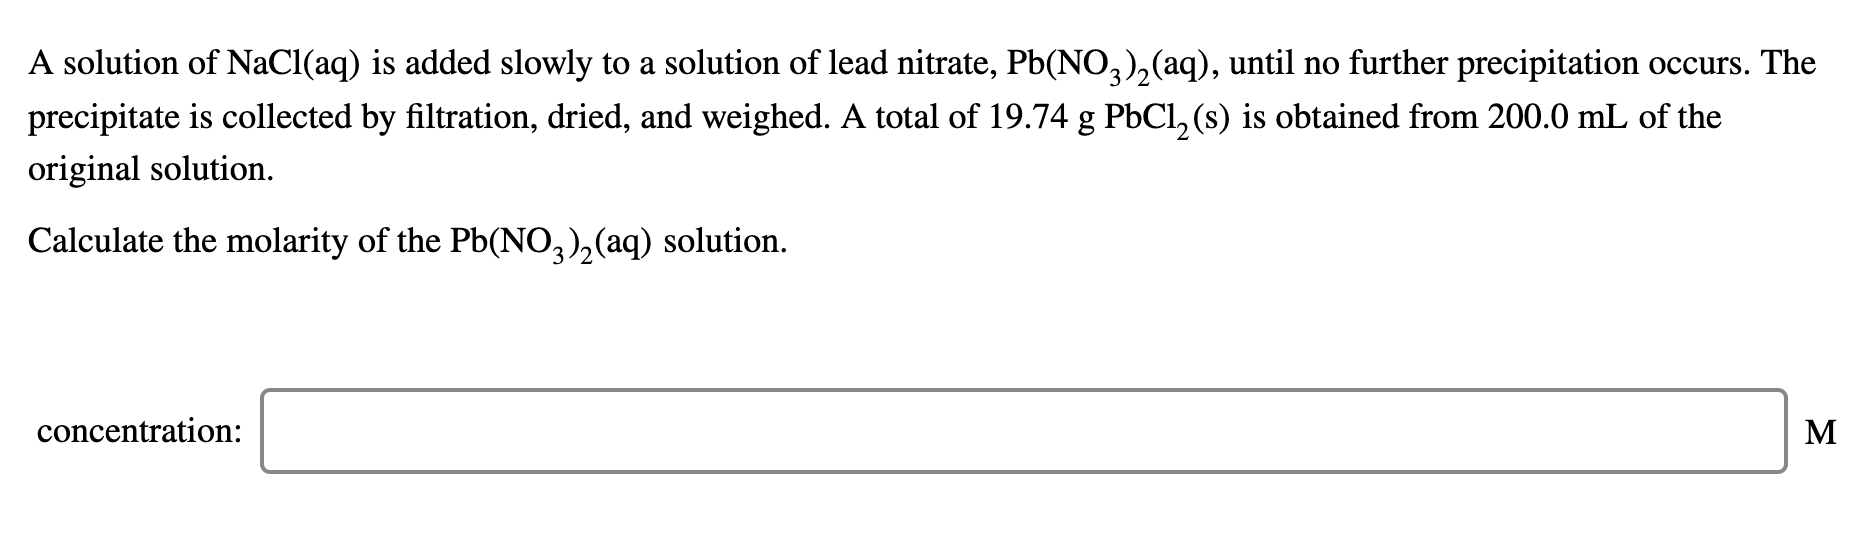 A solution of NaCl(aq) is added slowly to a solution of lead nitrate, Pb(NO,),(aq), until no further precipitation occurs. The
precipitate is collected by filtration, dried, and weighed. A total of 19.74 g PbCl, (s) is obtained from 200.0 mL of the
original solution.
Calculate the molarity of the Pb(NO,),(aq) solution.
concentration:
M
